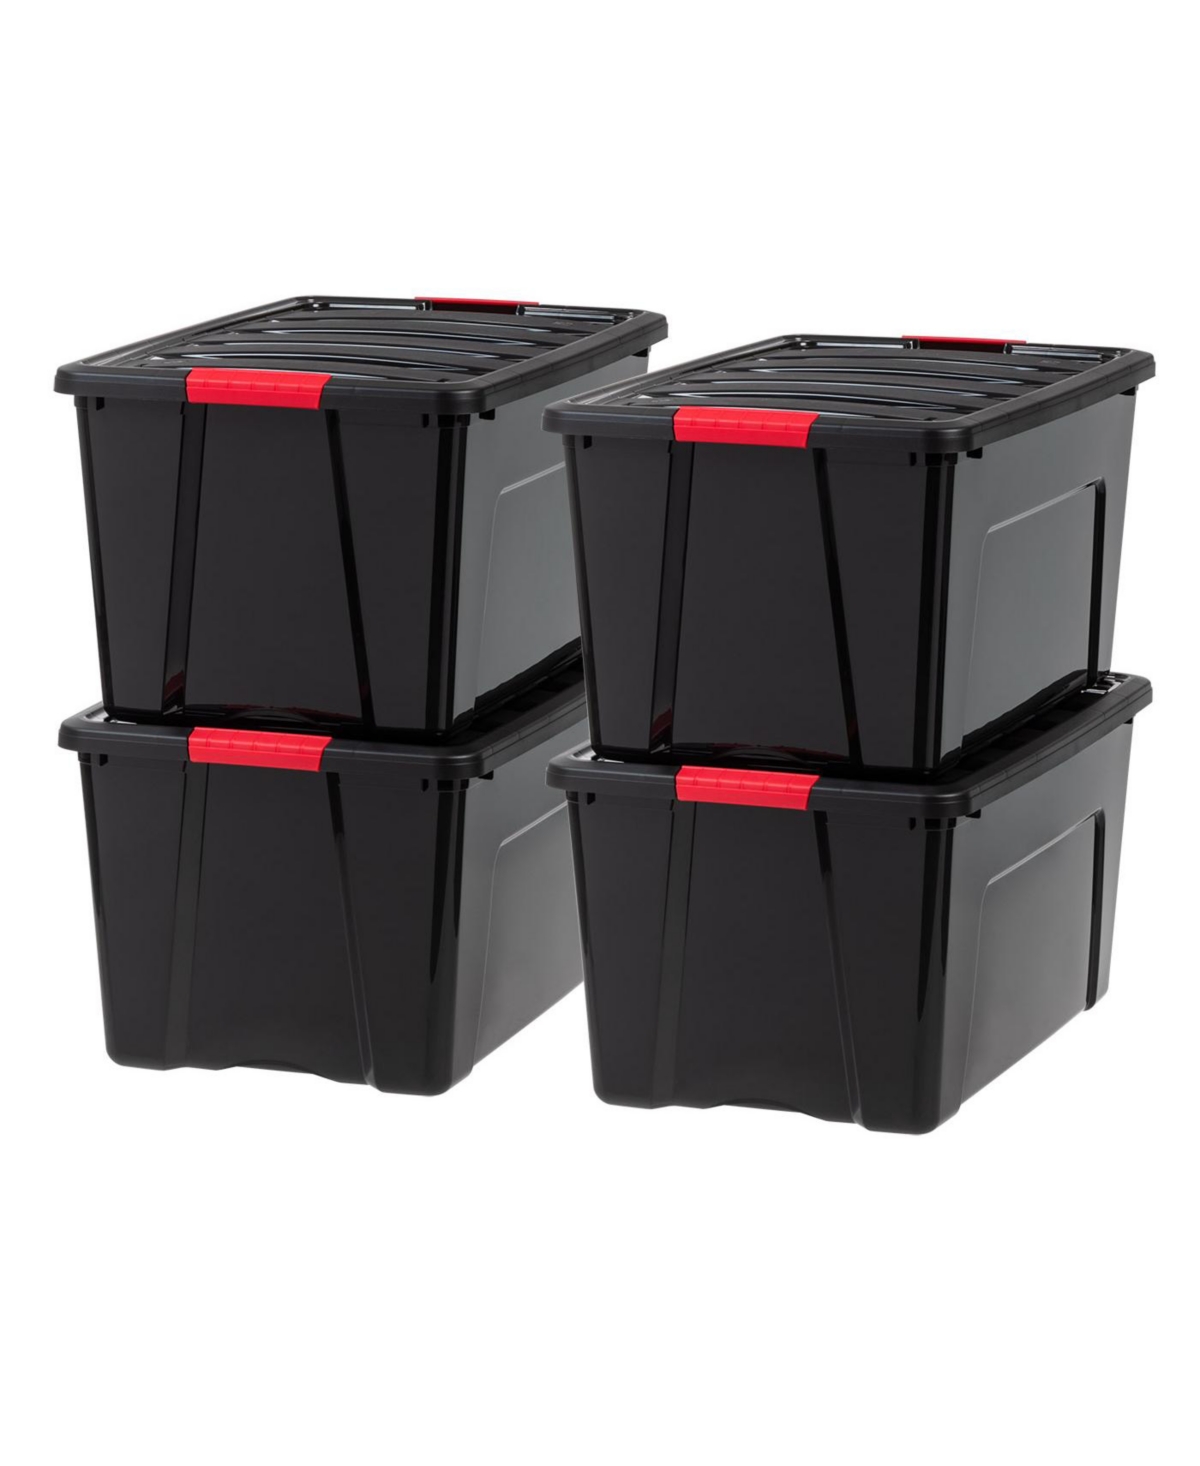 72 Qt Stackable Plastic Storage Bins with Lids, 4 Pack - Bpa-Free, Made in Usa - Garage Organizing Solution, Latches, Durable Nestable Contai